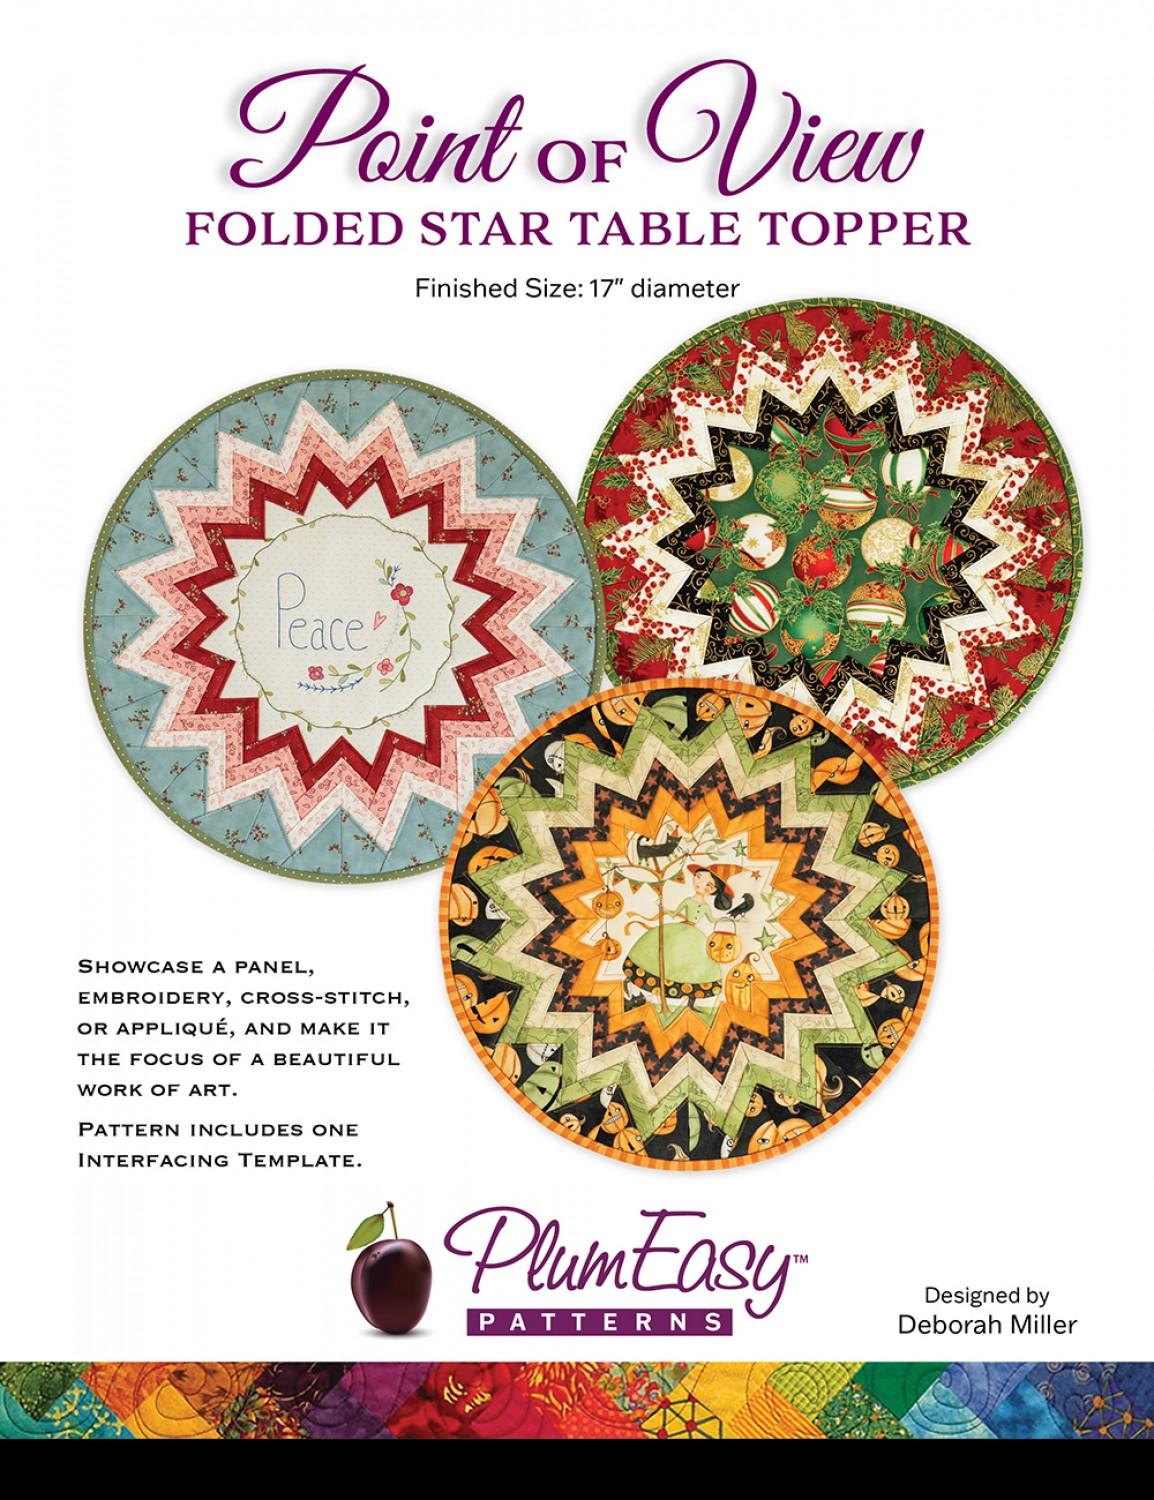 Point of View Folded Star Table Topper